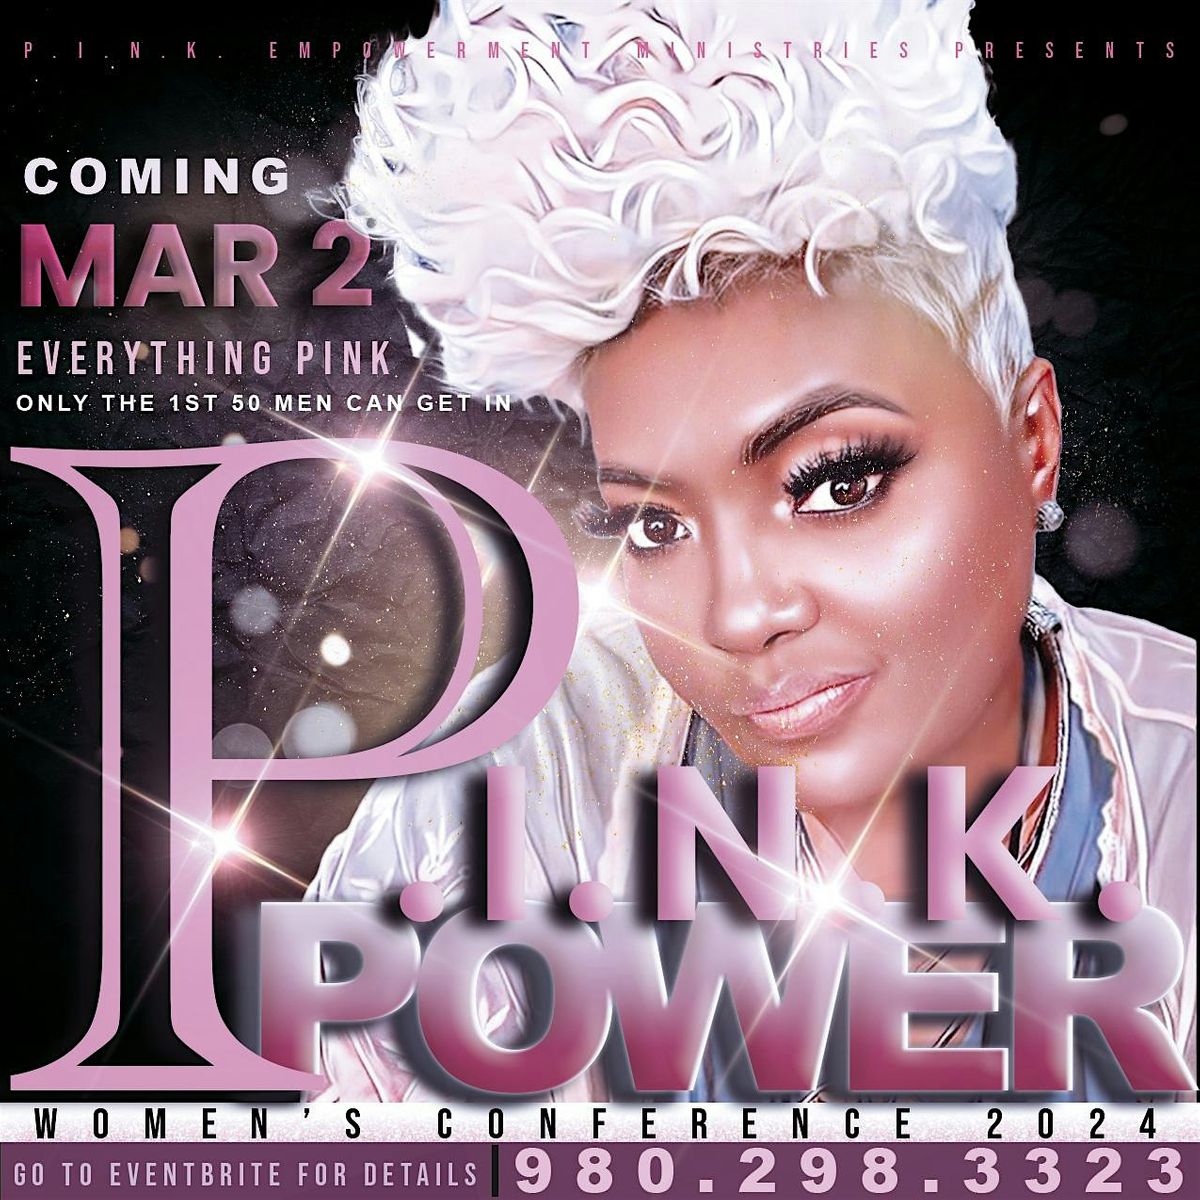 P.I.N.K. POWER WOMEN'S CONFERENCE 2024